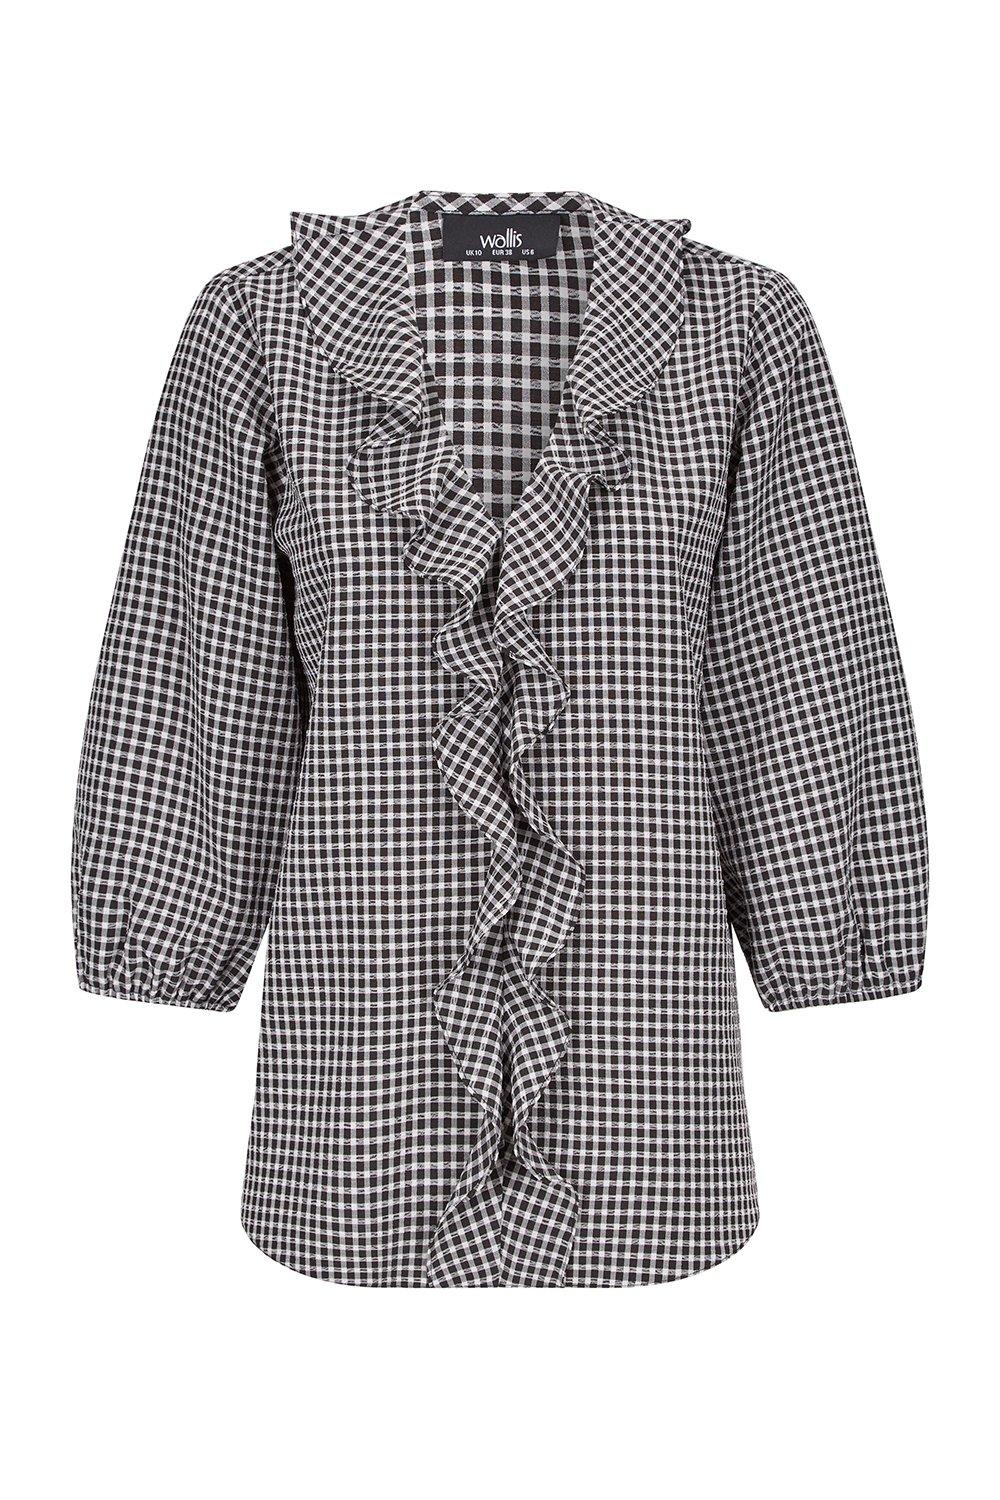 This On-Trend Top Will Take Any Look To The Next Level. A Gingham Print, Ruffle Detailing, And Puff Sleeves Make This A New Season Must-Have, Whilst A Relaxed Fit And Monochrome Colourway Will Have You Wearing This On-Repeat. Team With Jeans And White Tra